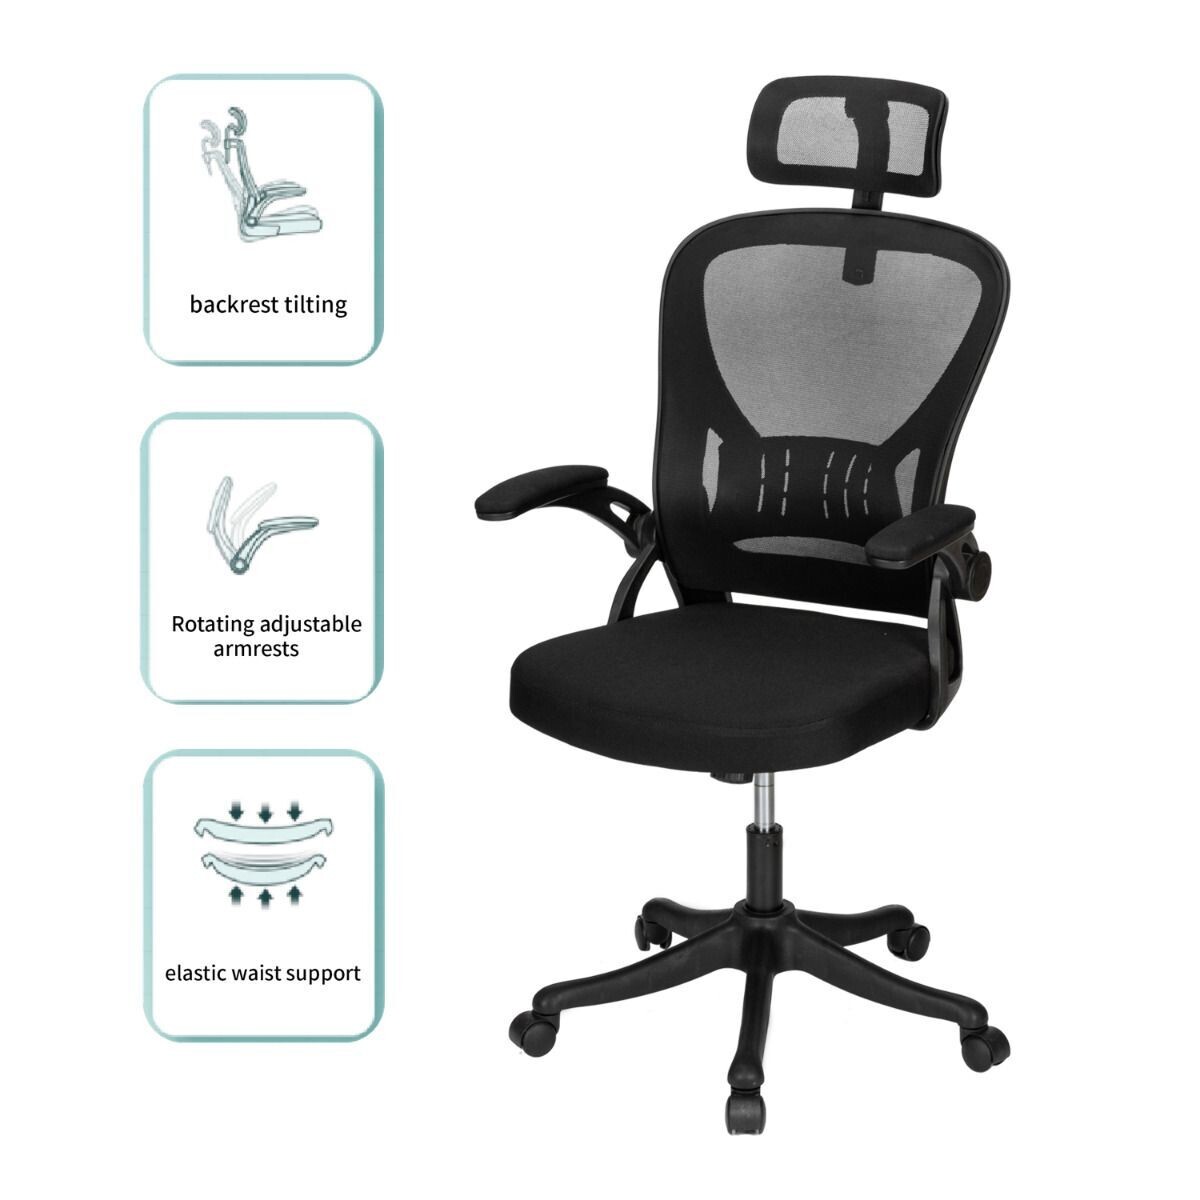 DELI Office Chair with High-back Mesh Chair with Head-Rest & Rotating Adjustable Arms #E4505